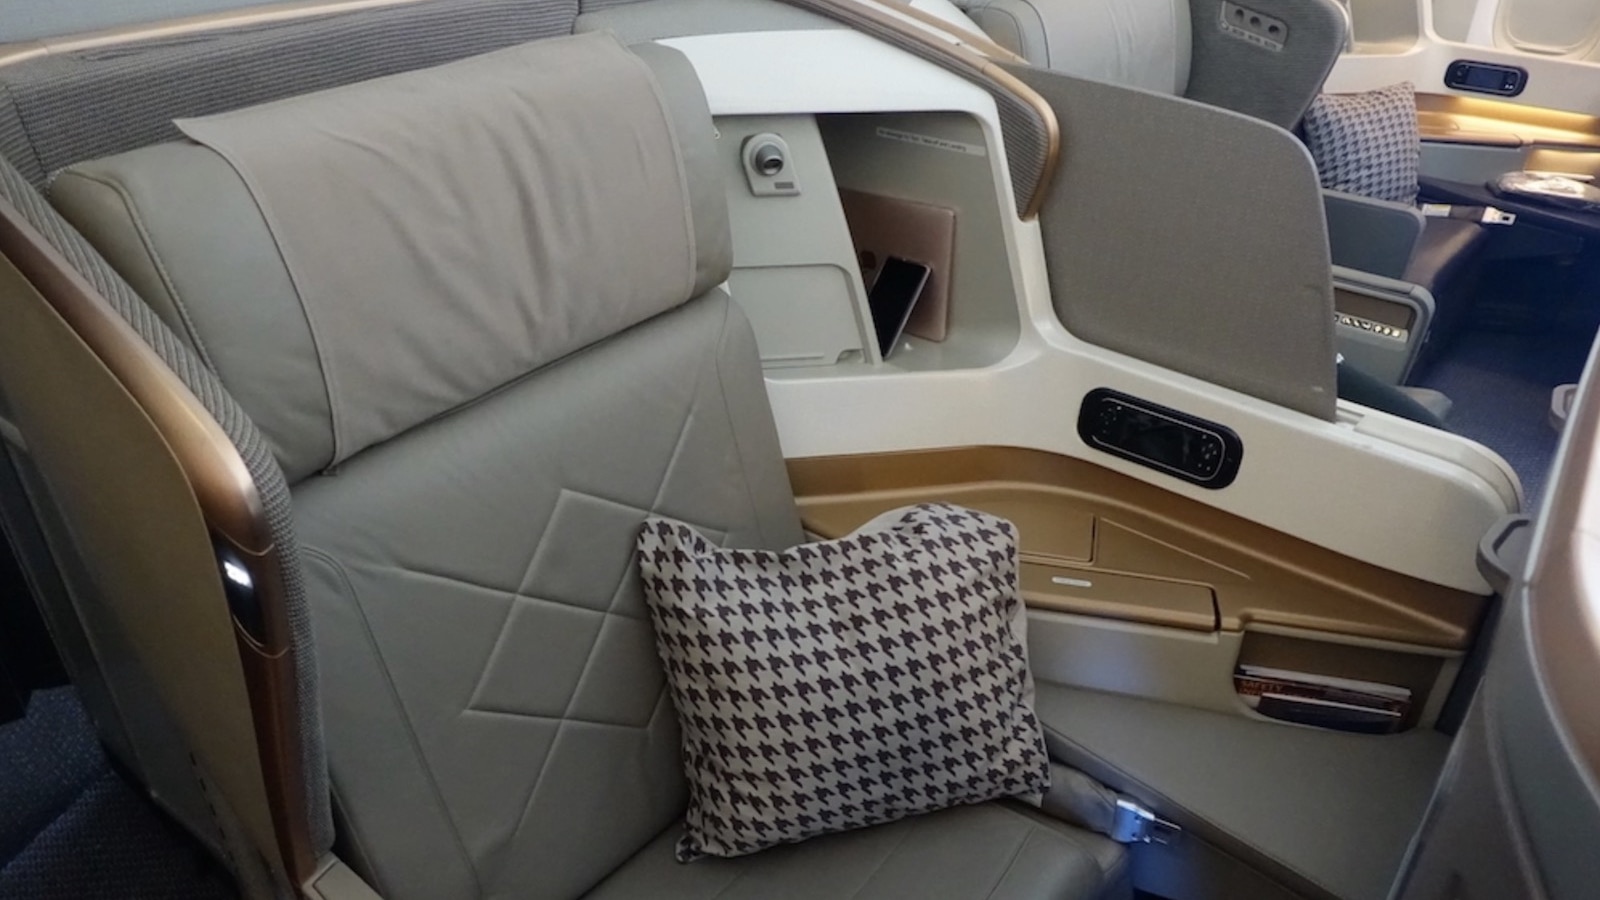 Singapore Airlines 777-300ER Business Class